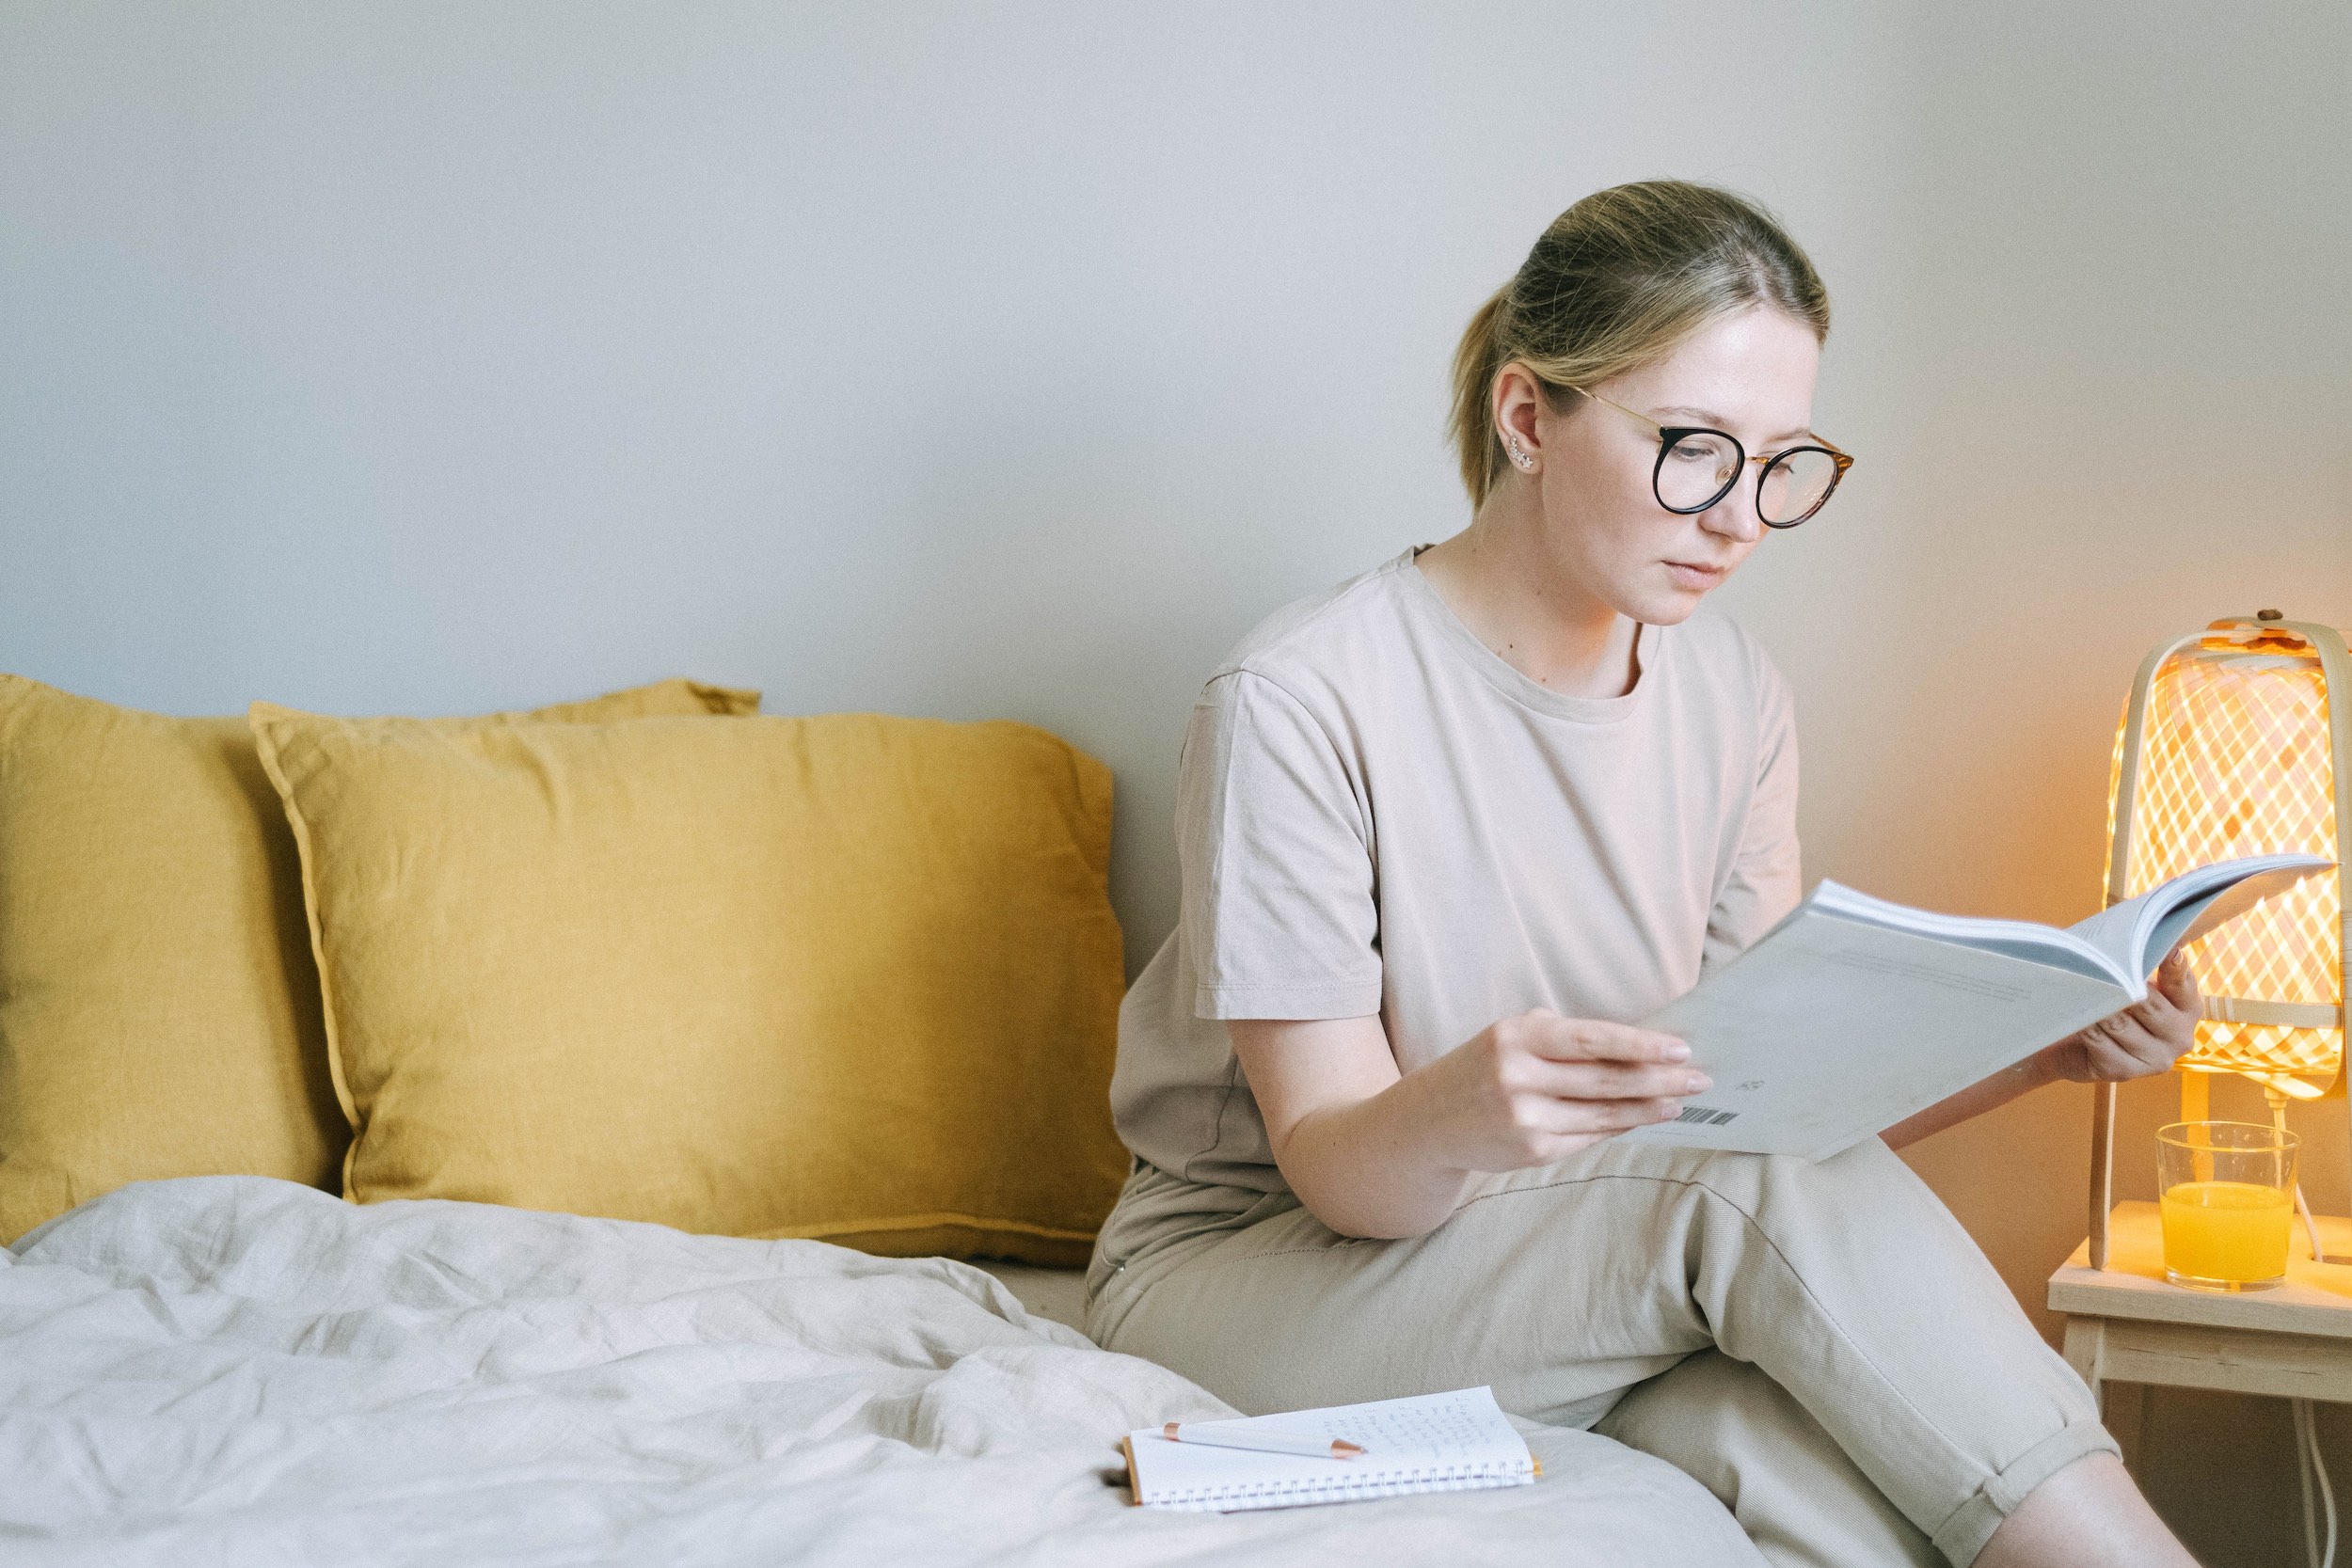 Woman sitting at bedside is focused reading a book